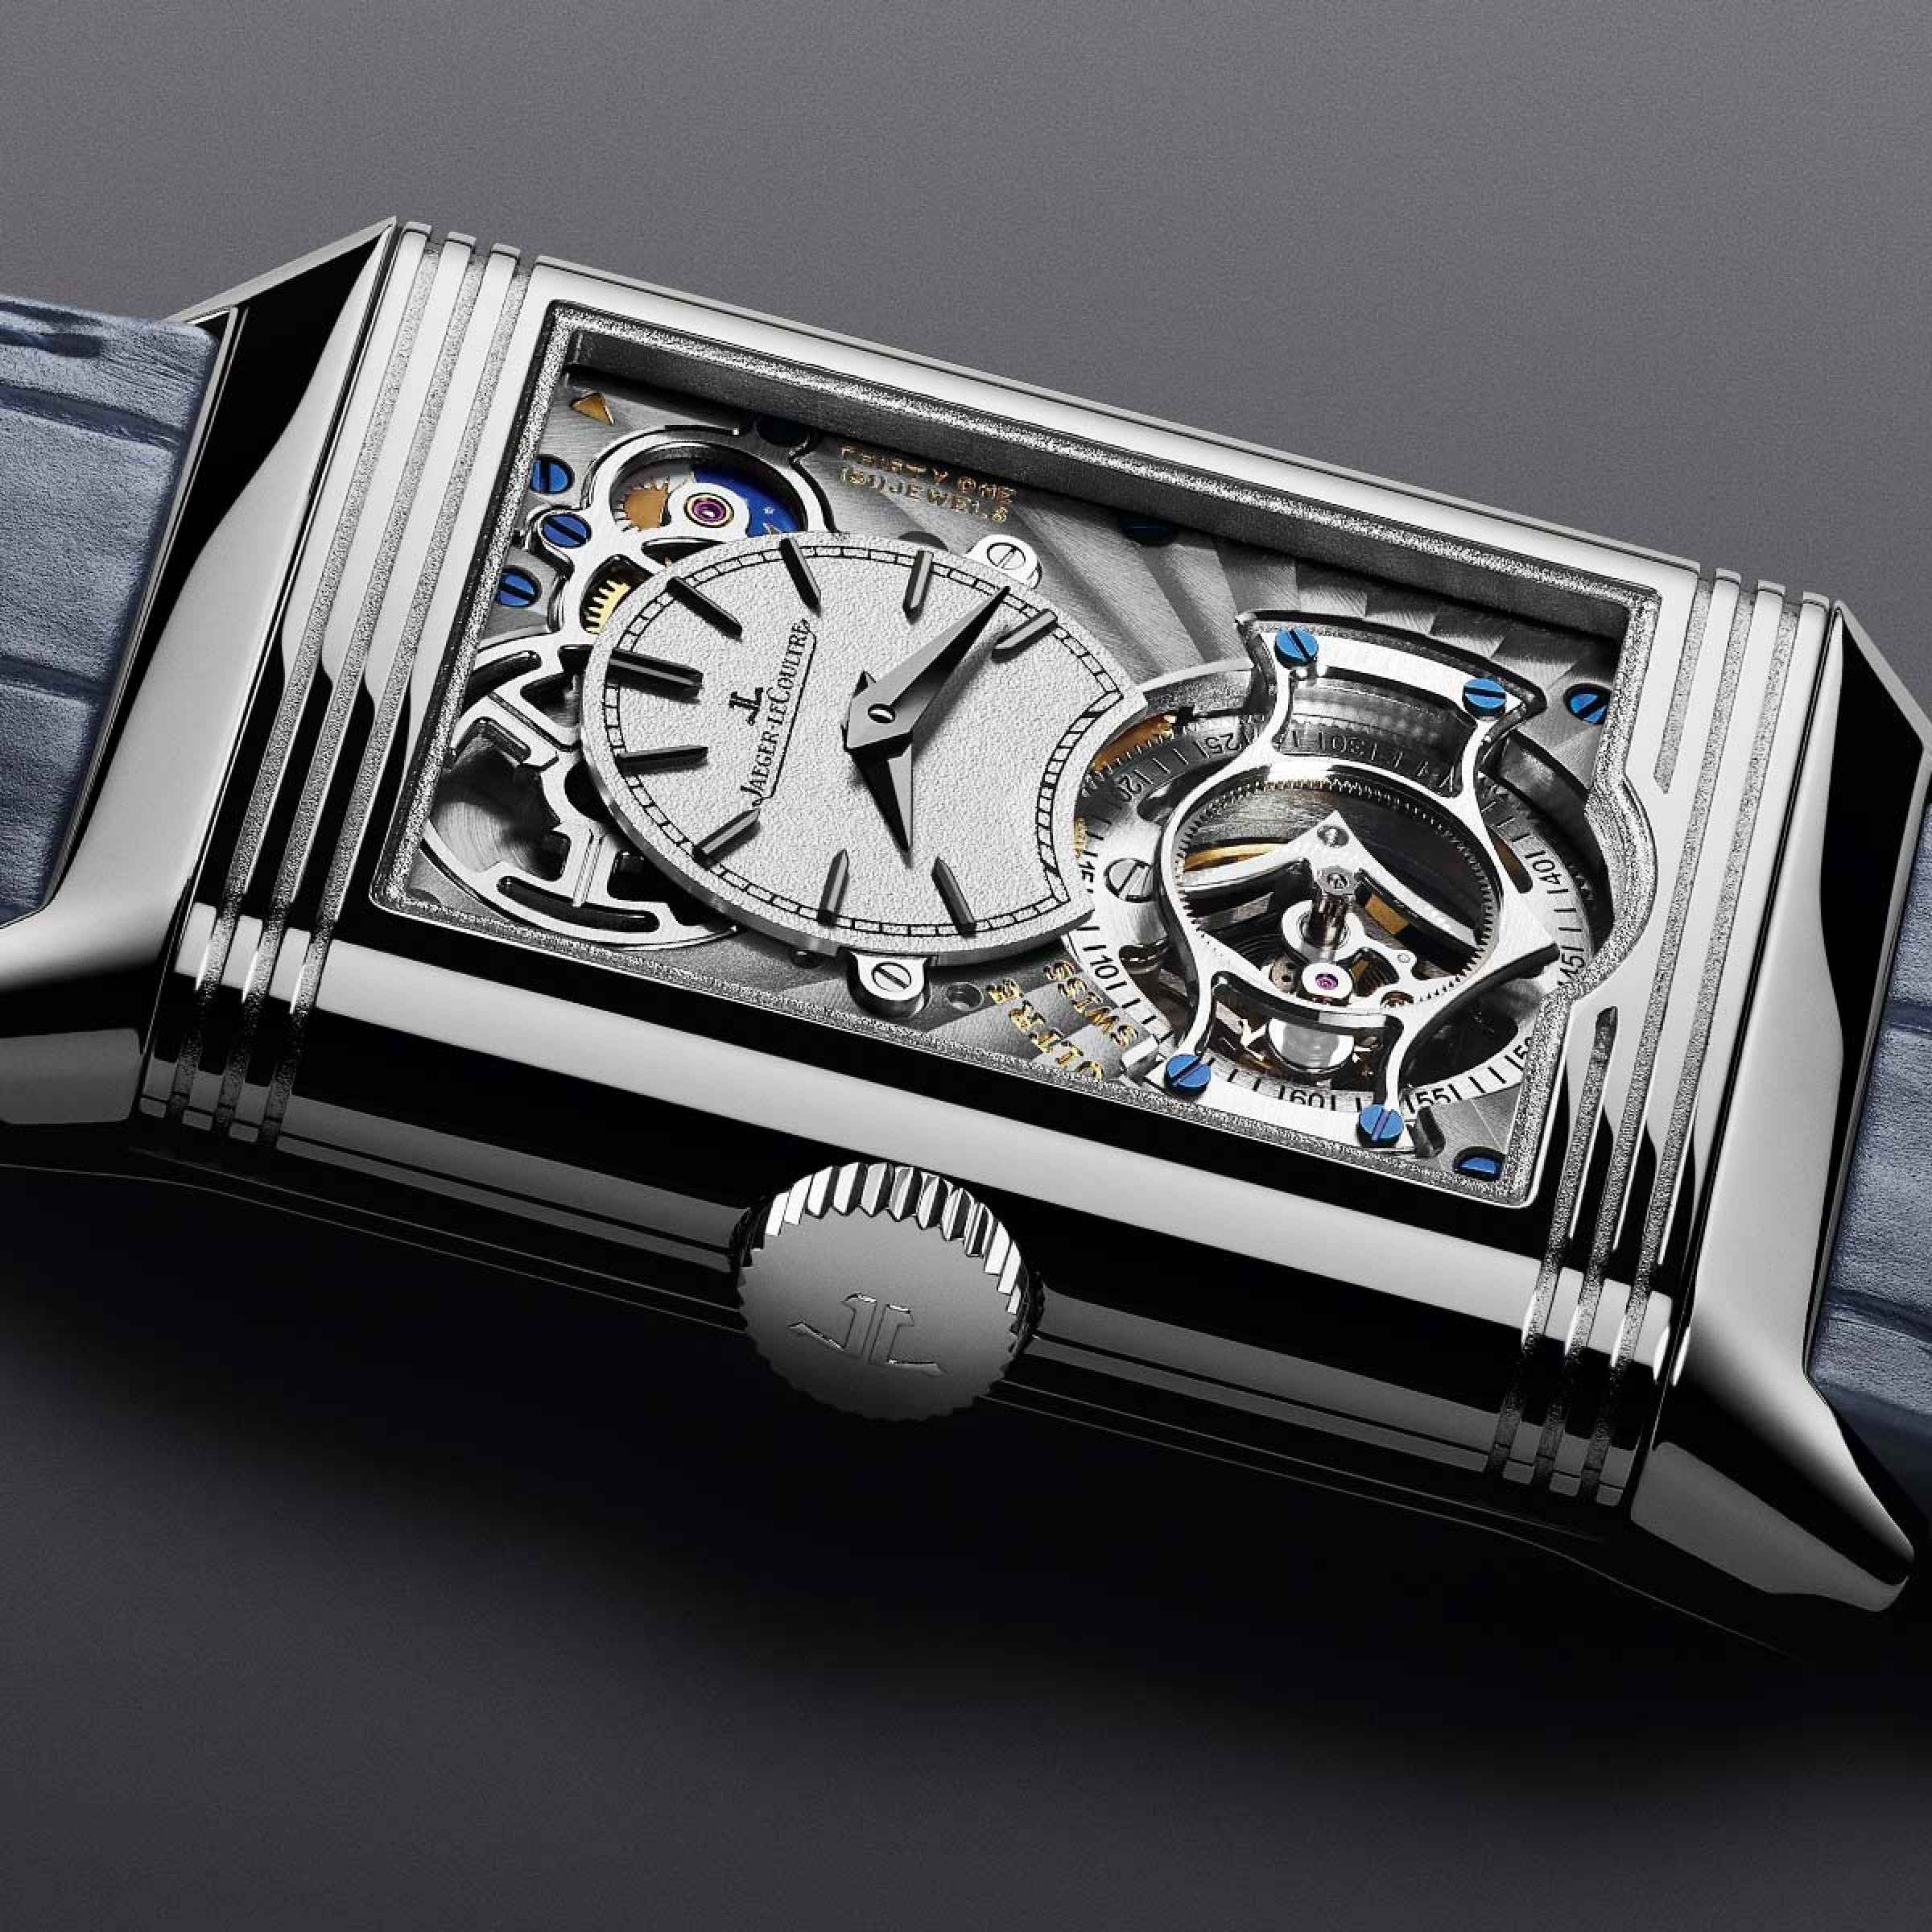 Jaeger‑LeCoultre is taking a new step in terms of mechanical and aesthetic expertise.